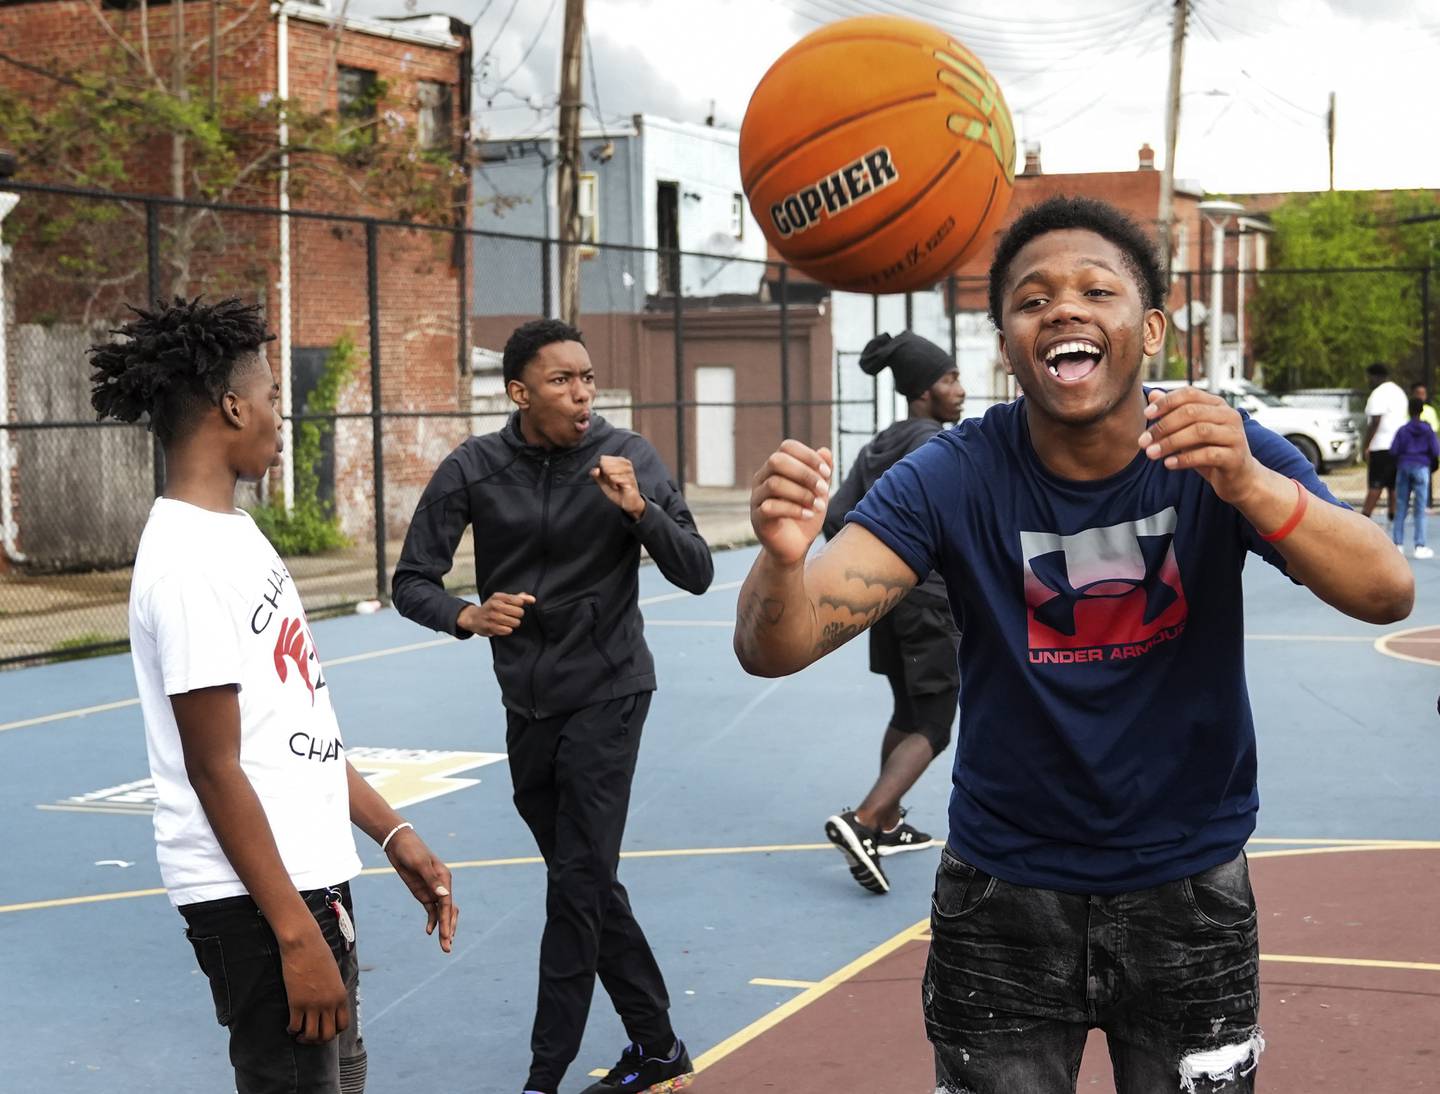 Myron Green, reacts after his friends missed a shot during a pick up game of basketball, at Tench Tilghman Basketball Court, in Baltimore, April 15, 2023.